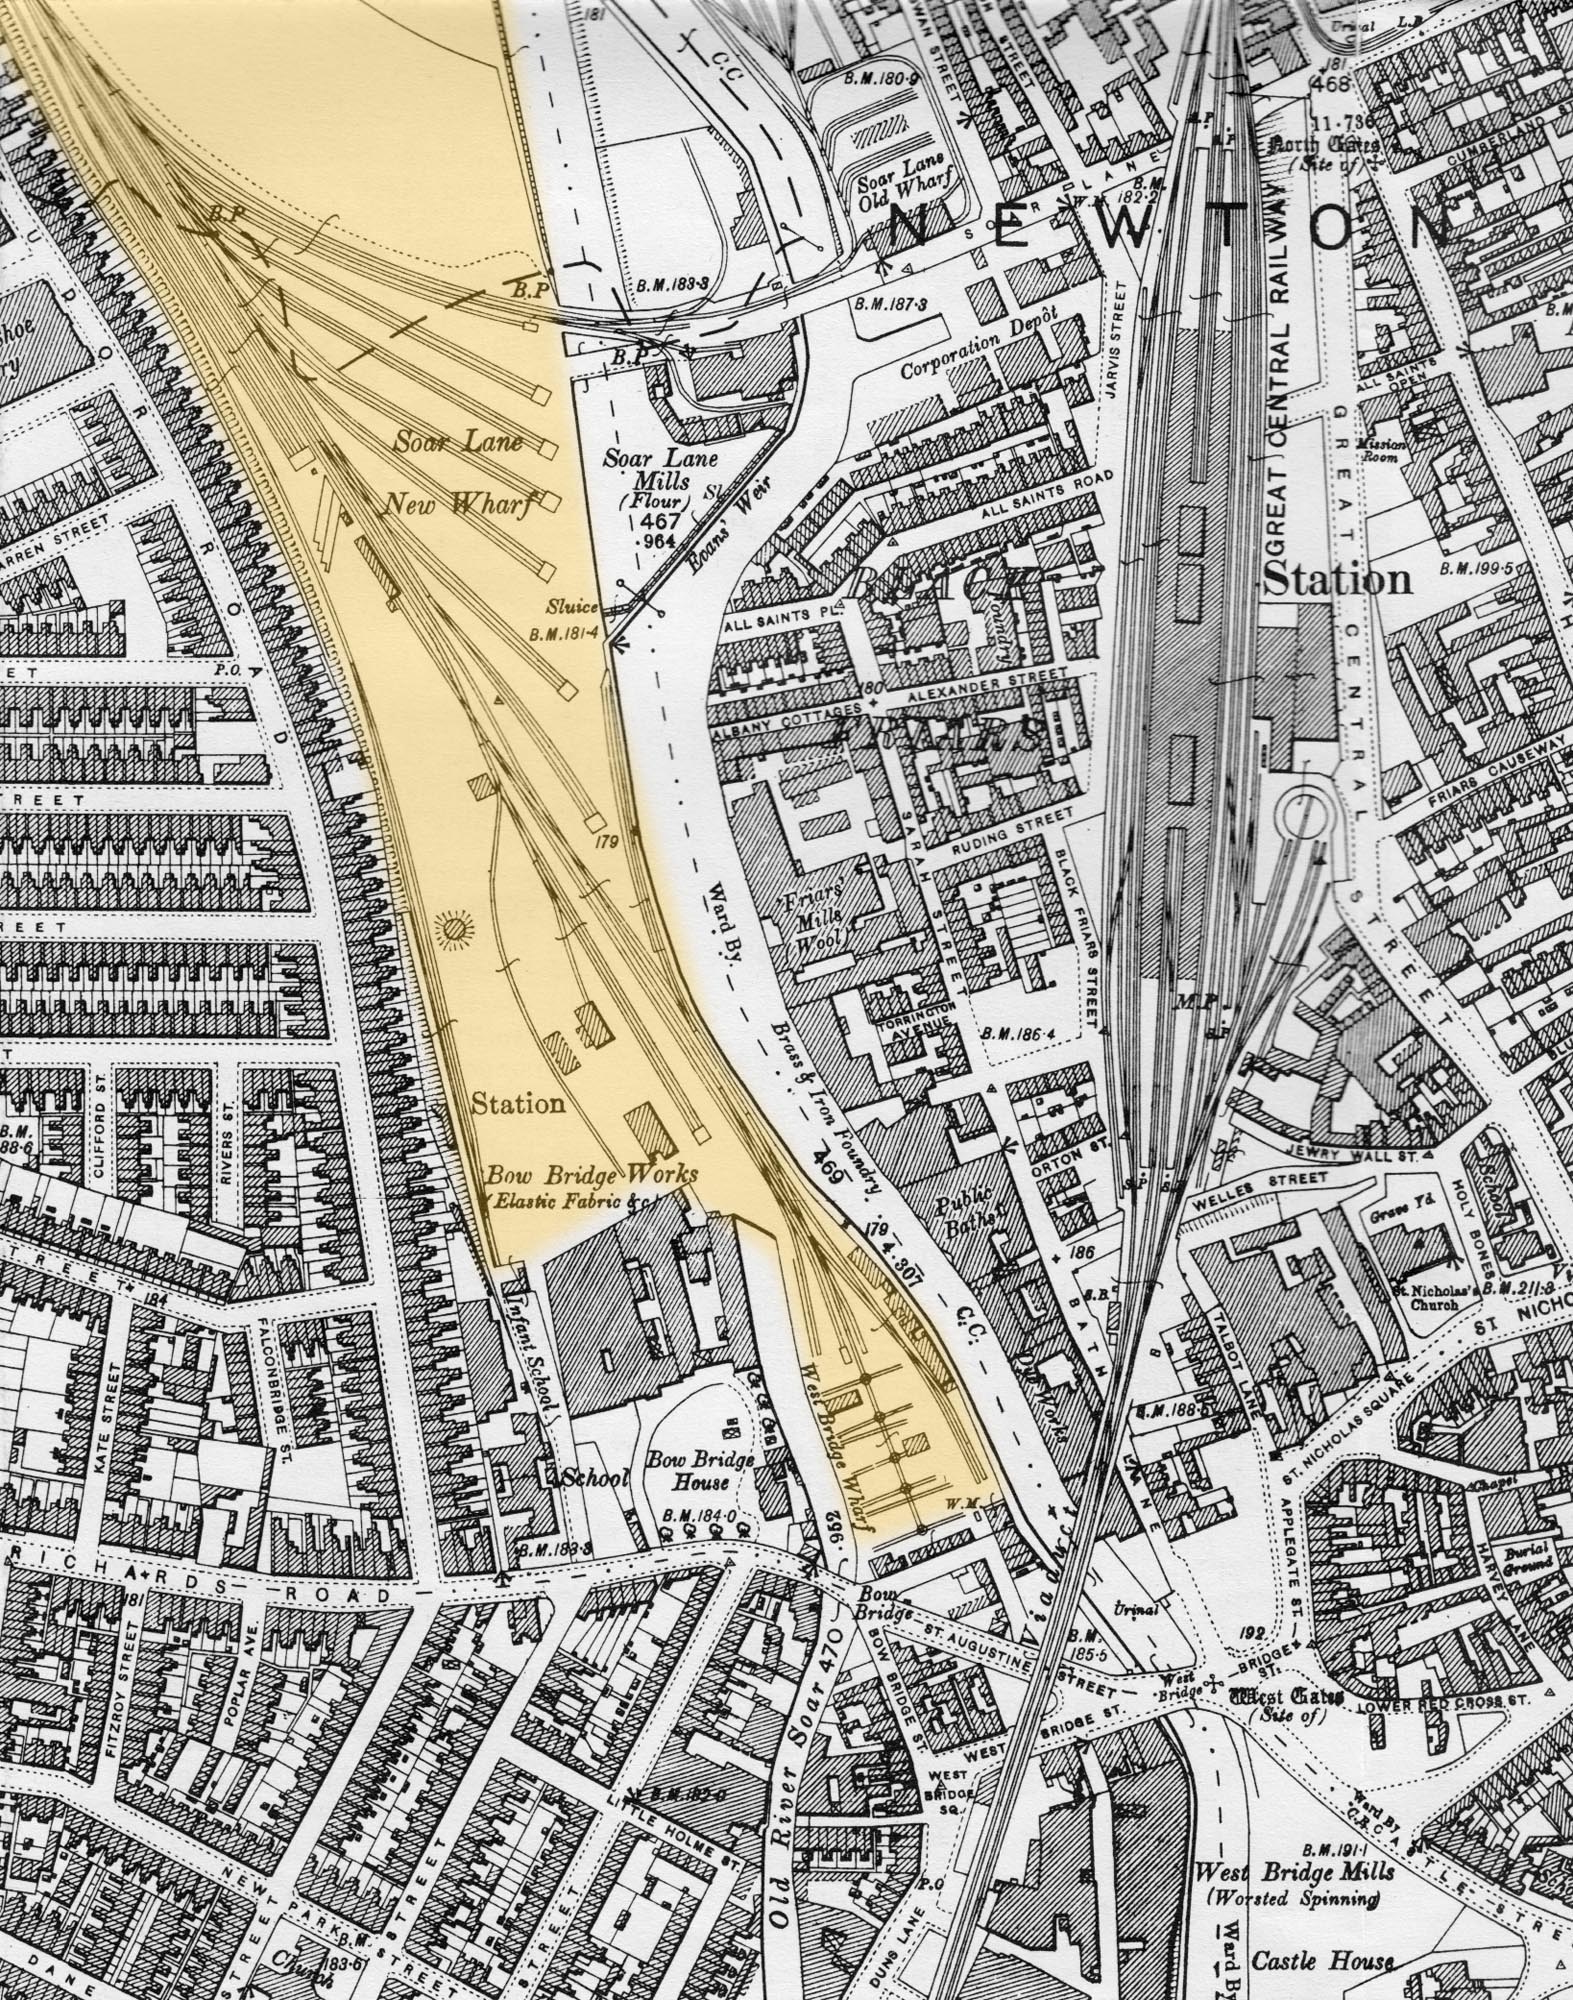 Map showing the West Bridge Station and railway sidings highlighted in yellow - 